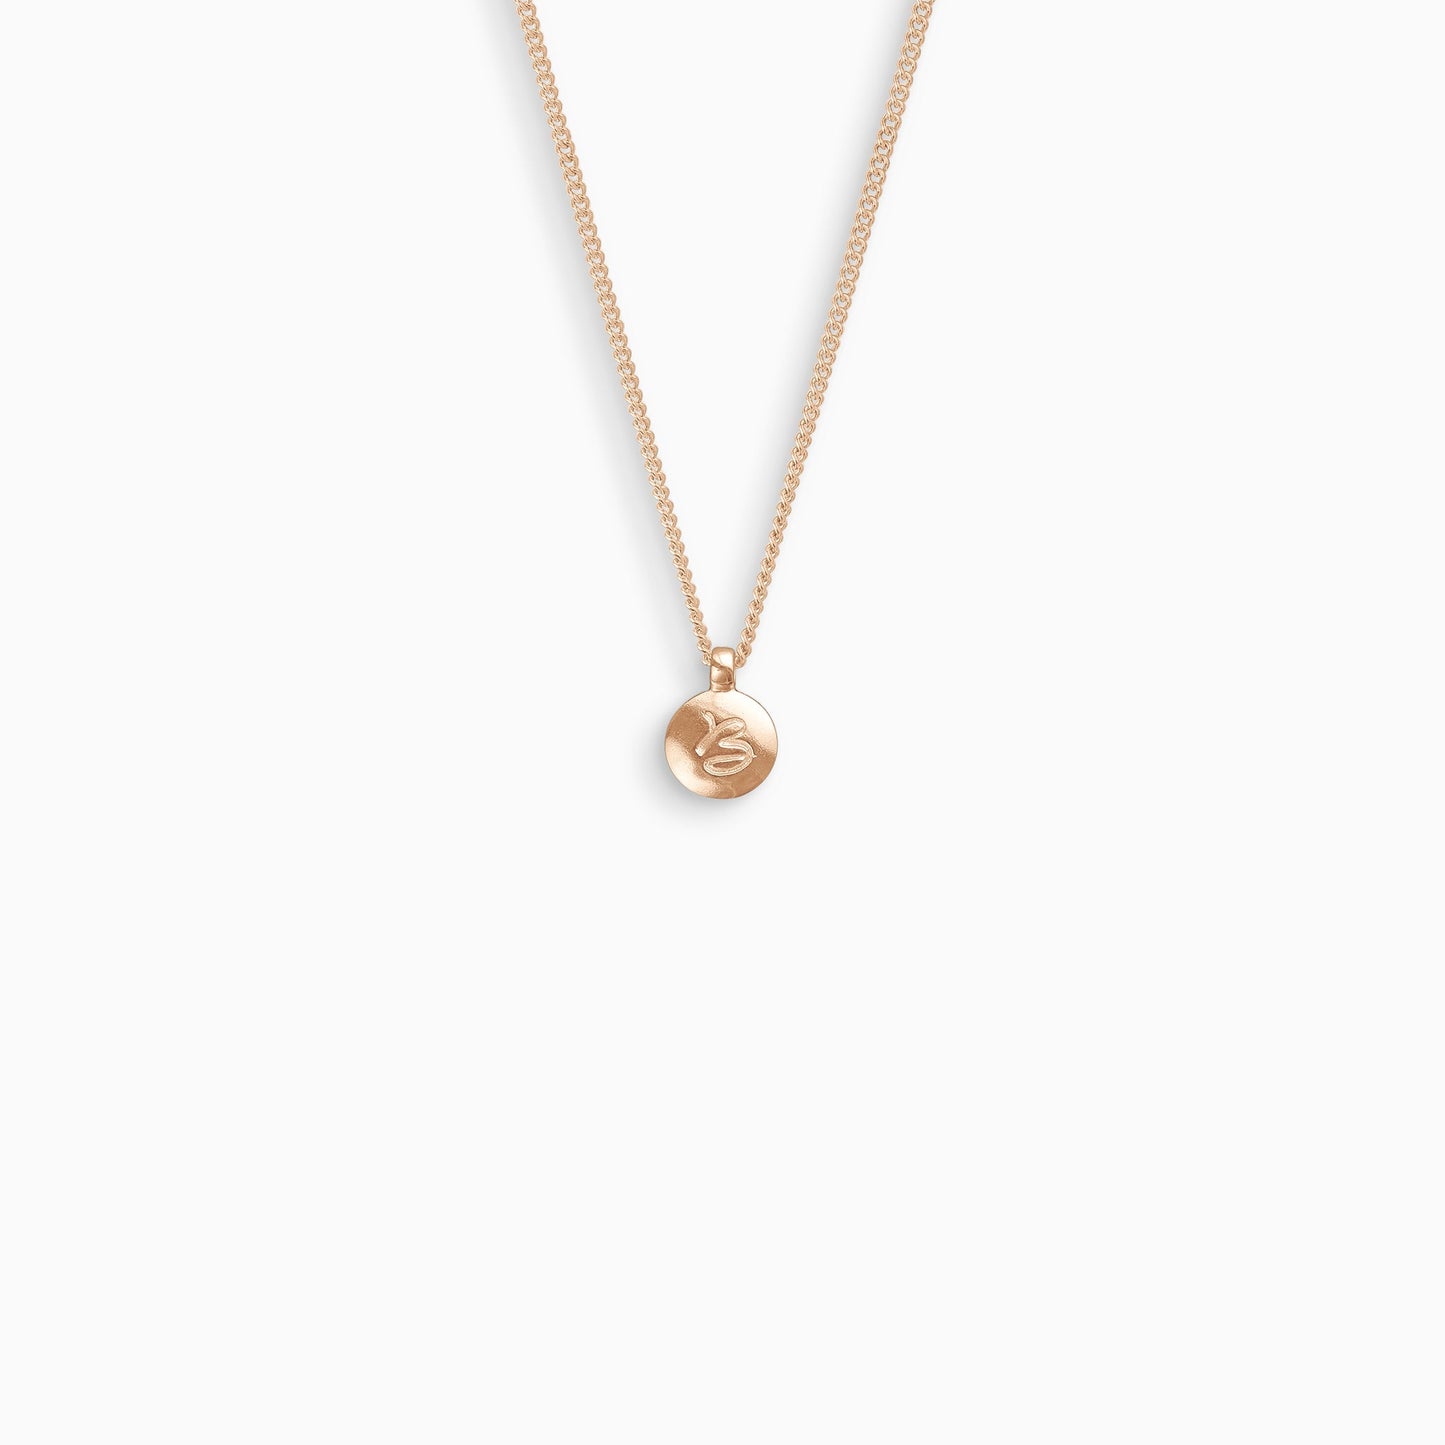 18ct Fairtrade rose gold 13mm round smooth convex pendant inscribed with a single letter of your choice from A-Z. On a 45cm curb chain.